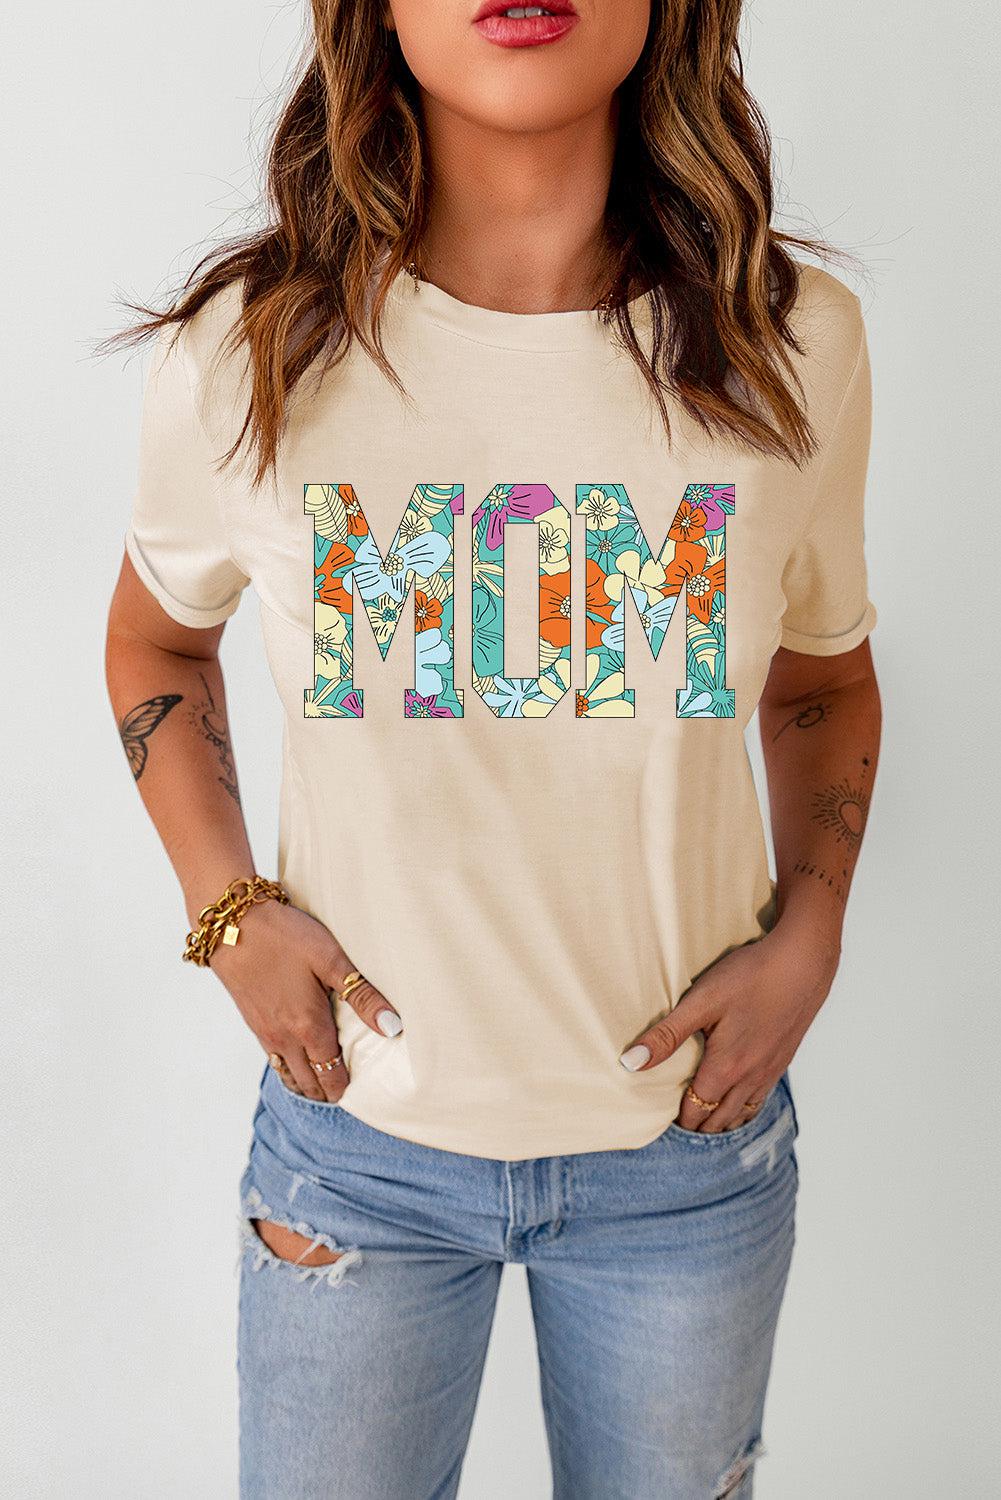 MOM Floral Graphic T-Shirt BLUE ZONE PLANET